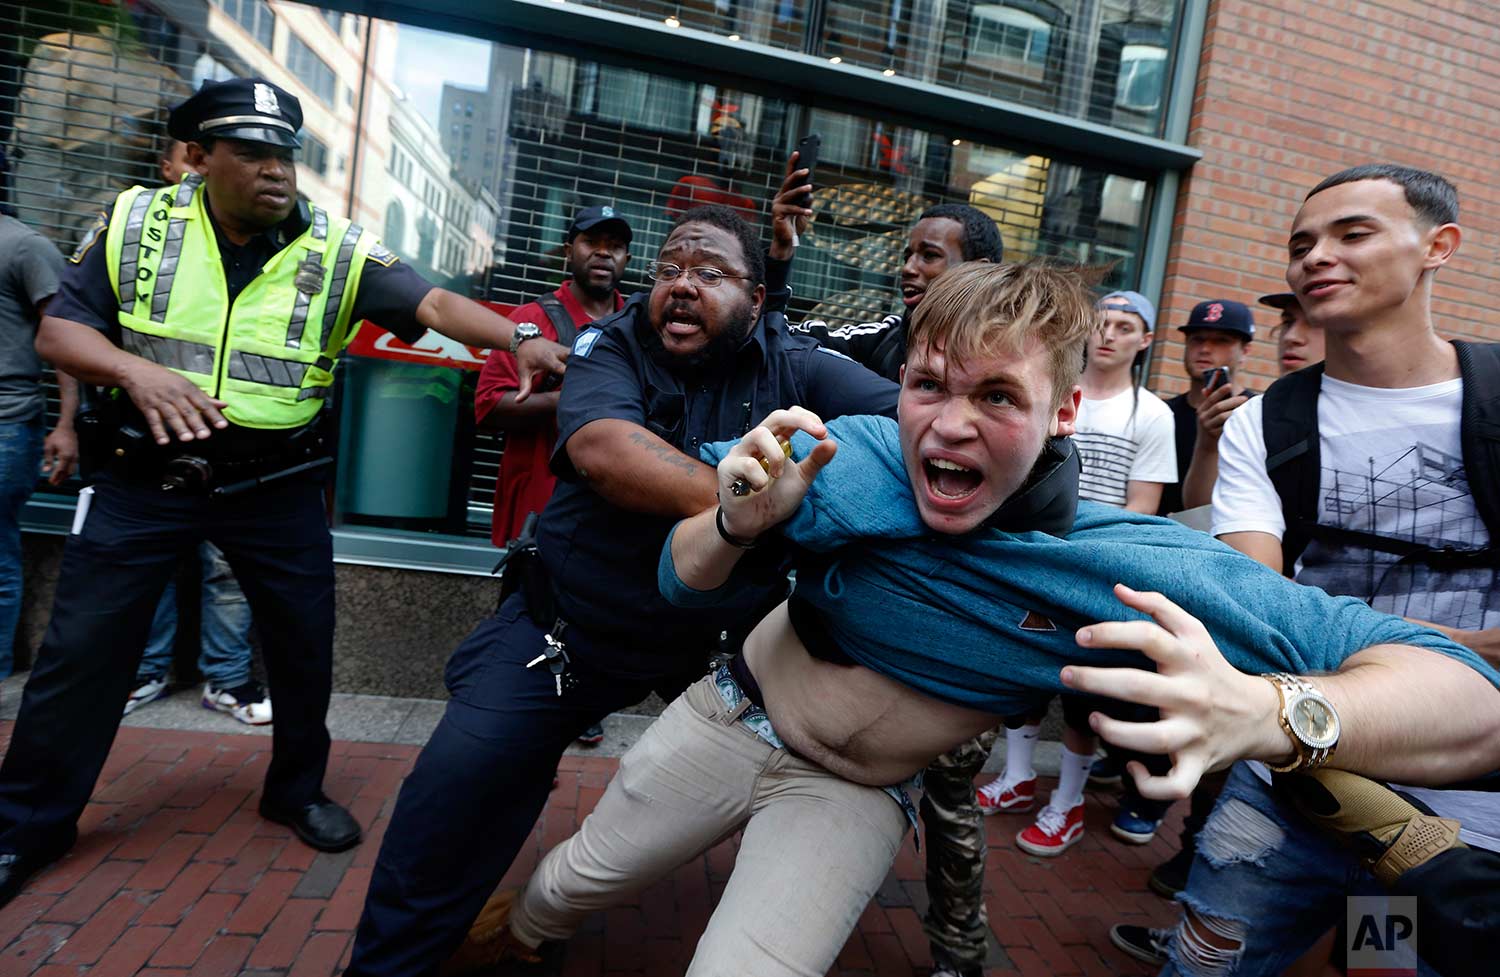  A counter-protester, part of a small group who remained on the street hours after a "Free Speech" rally was staged by conservative activists, scuffles with a security guard and police, Saturday, Aug. 19, 2017, in Boston. (AP Photo/Michael Dwyer) 